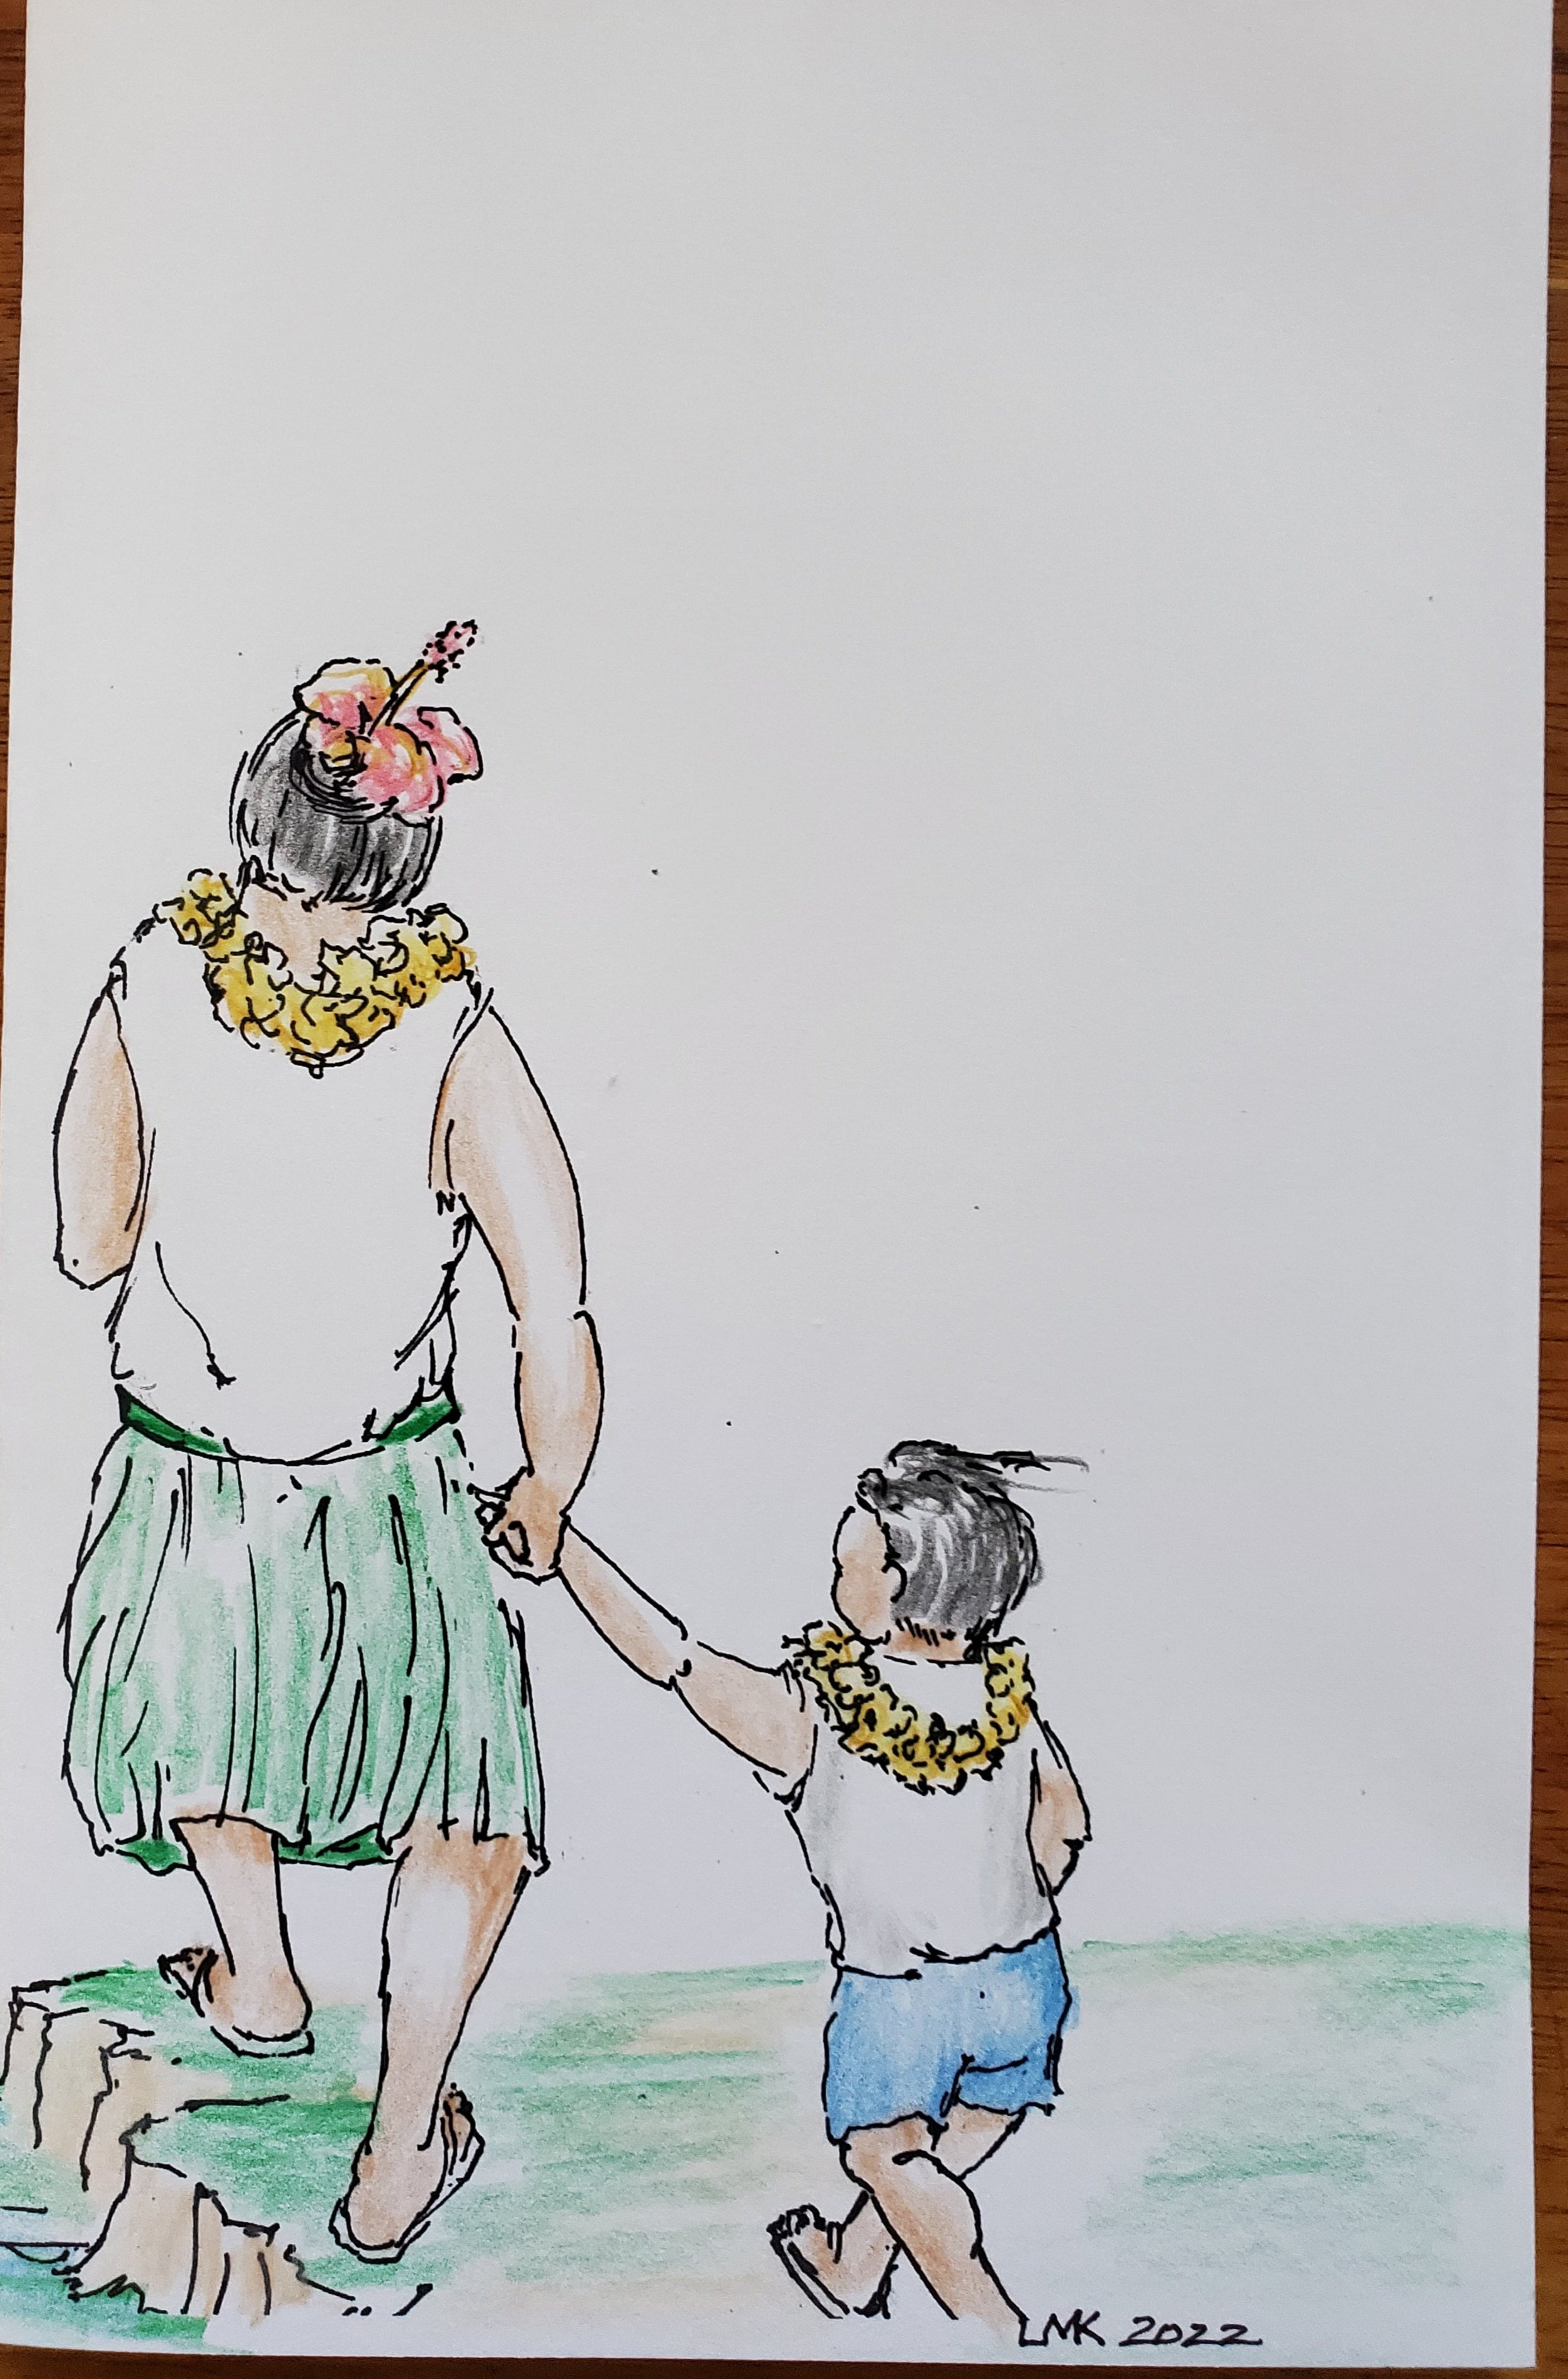 A drawing including two figures holding hands, an adult and a child, wearing leis and one figure wearing a flower and a grass skirt